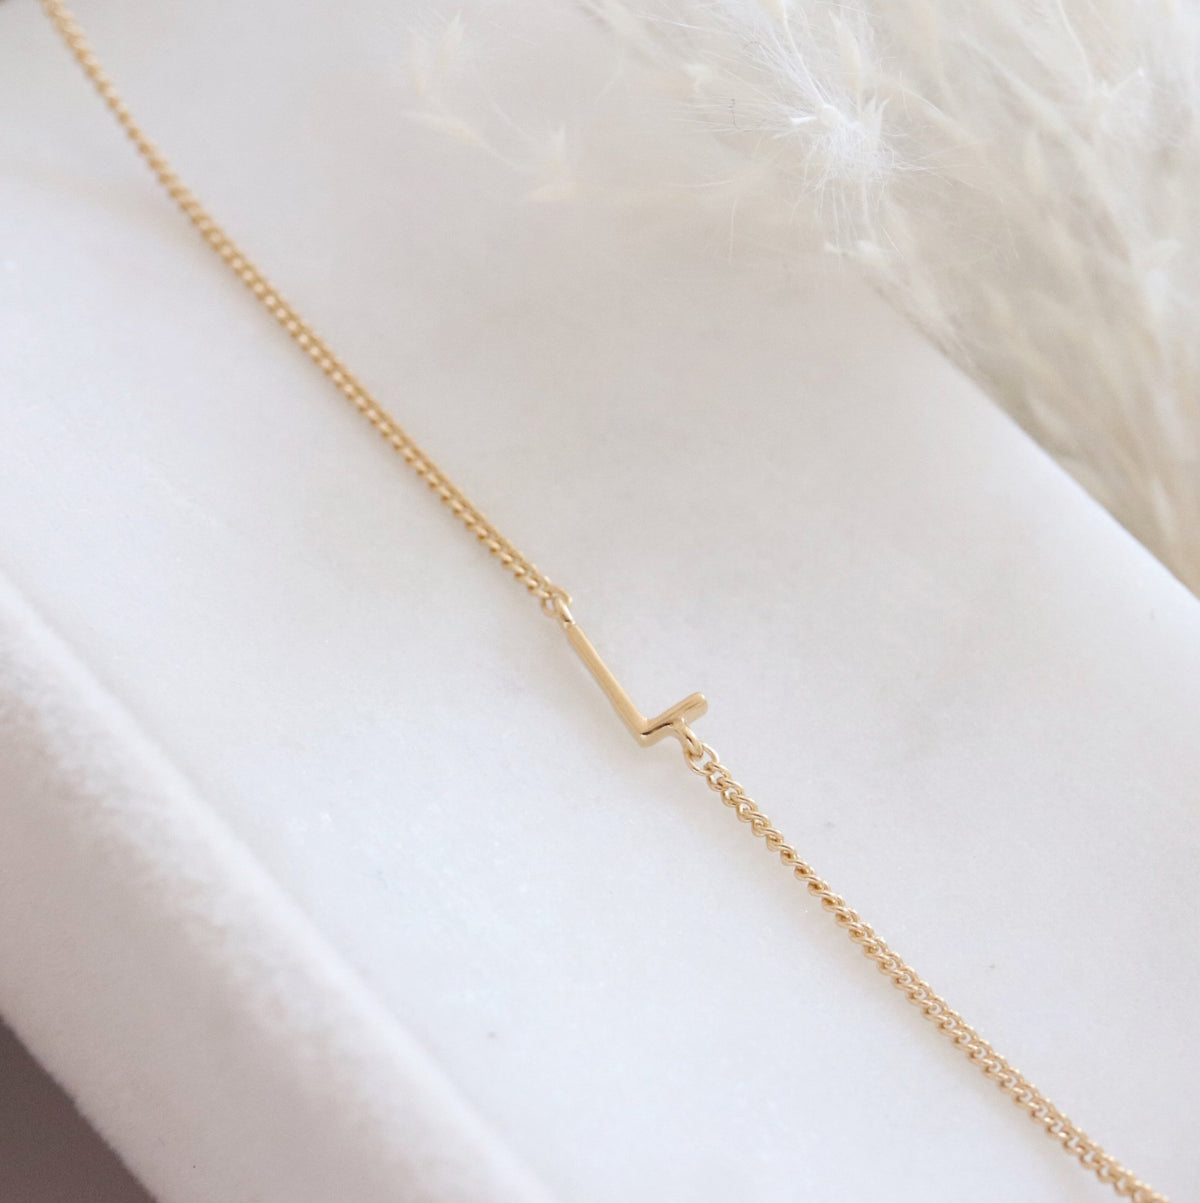 NOTABLE OFFSET INITIAL NECKLACE - L - GOLD - SO PRETTY CARA COTTER